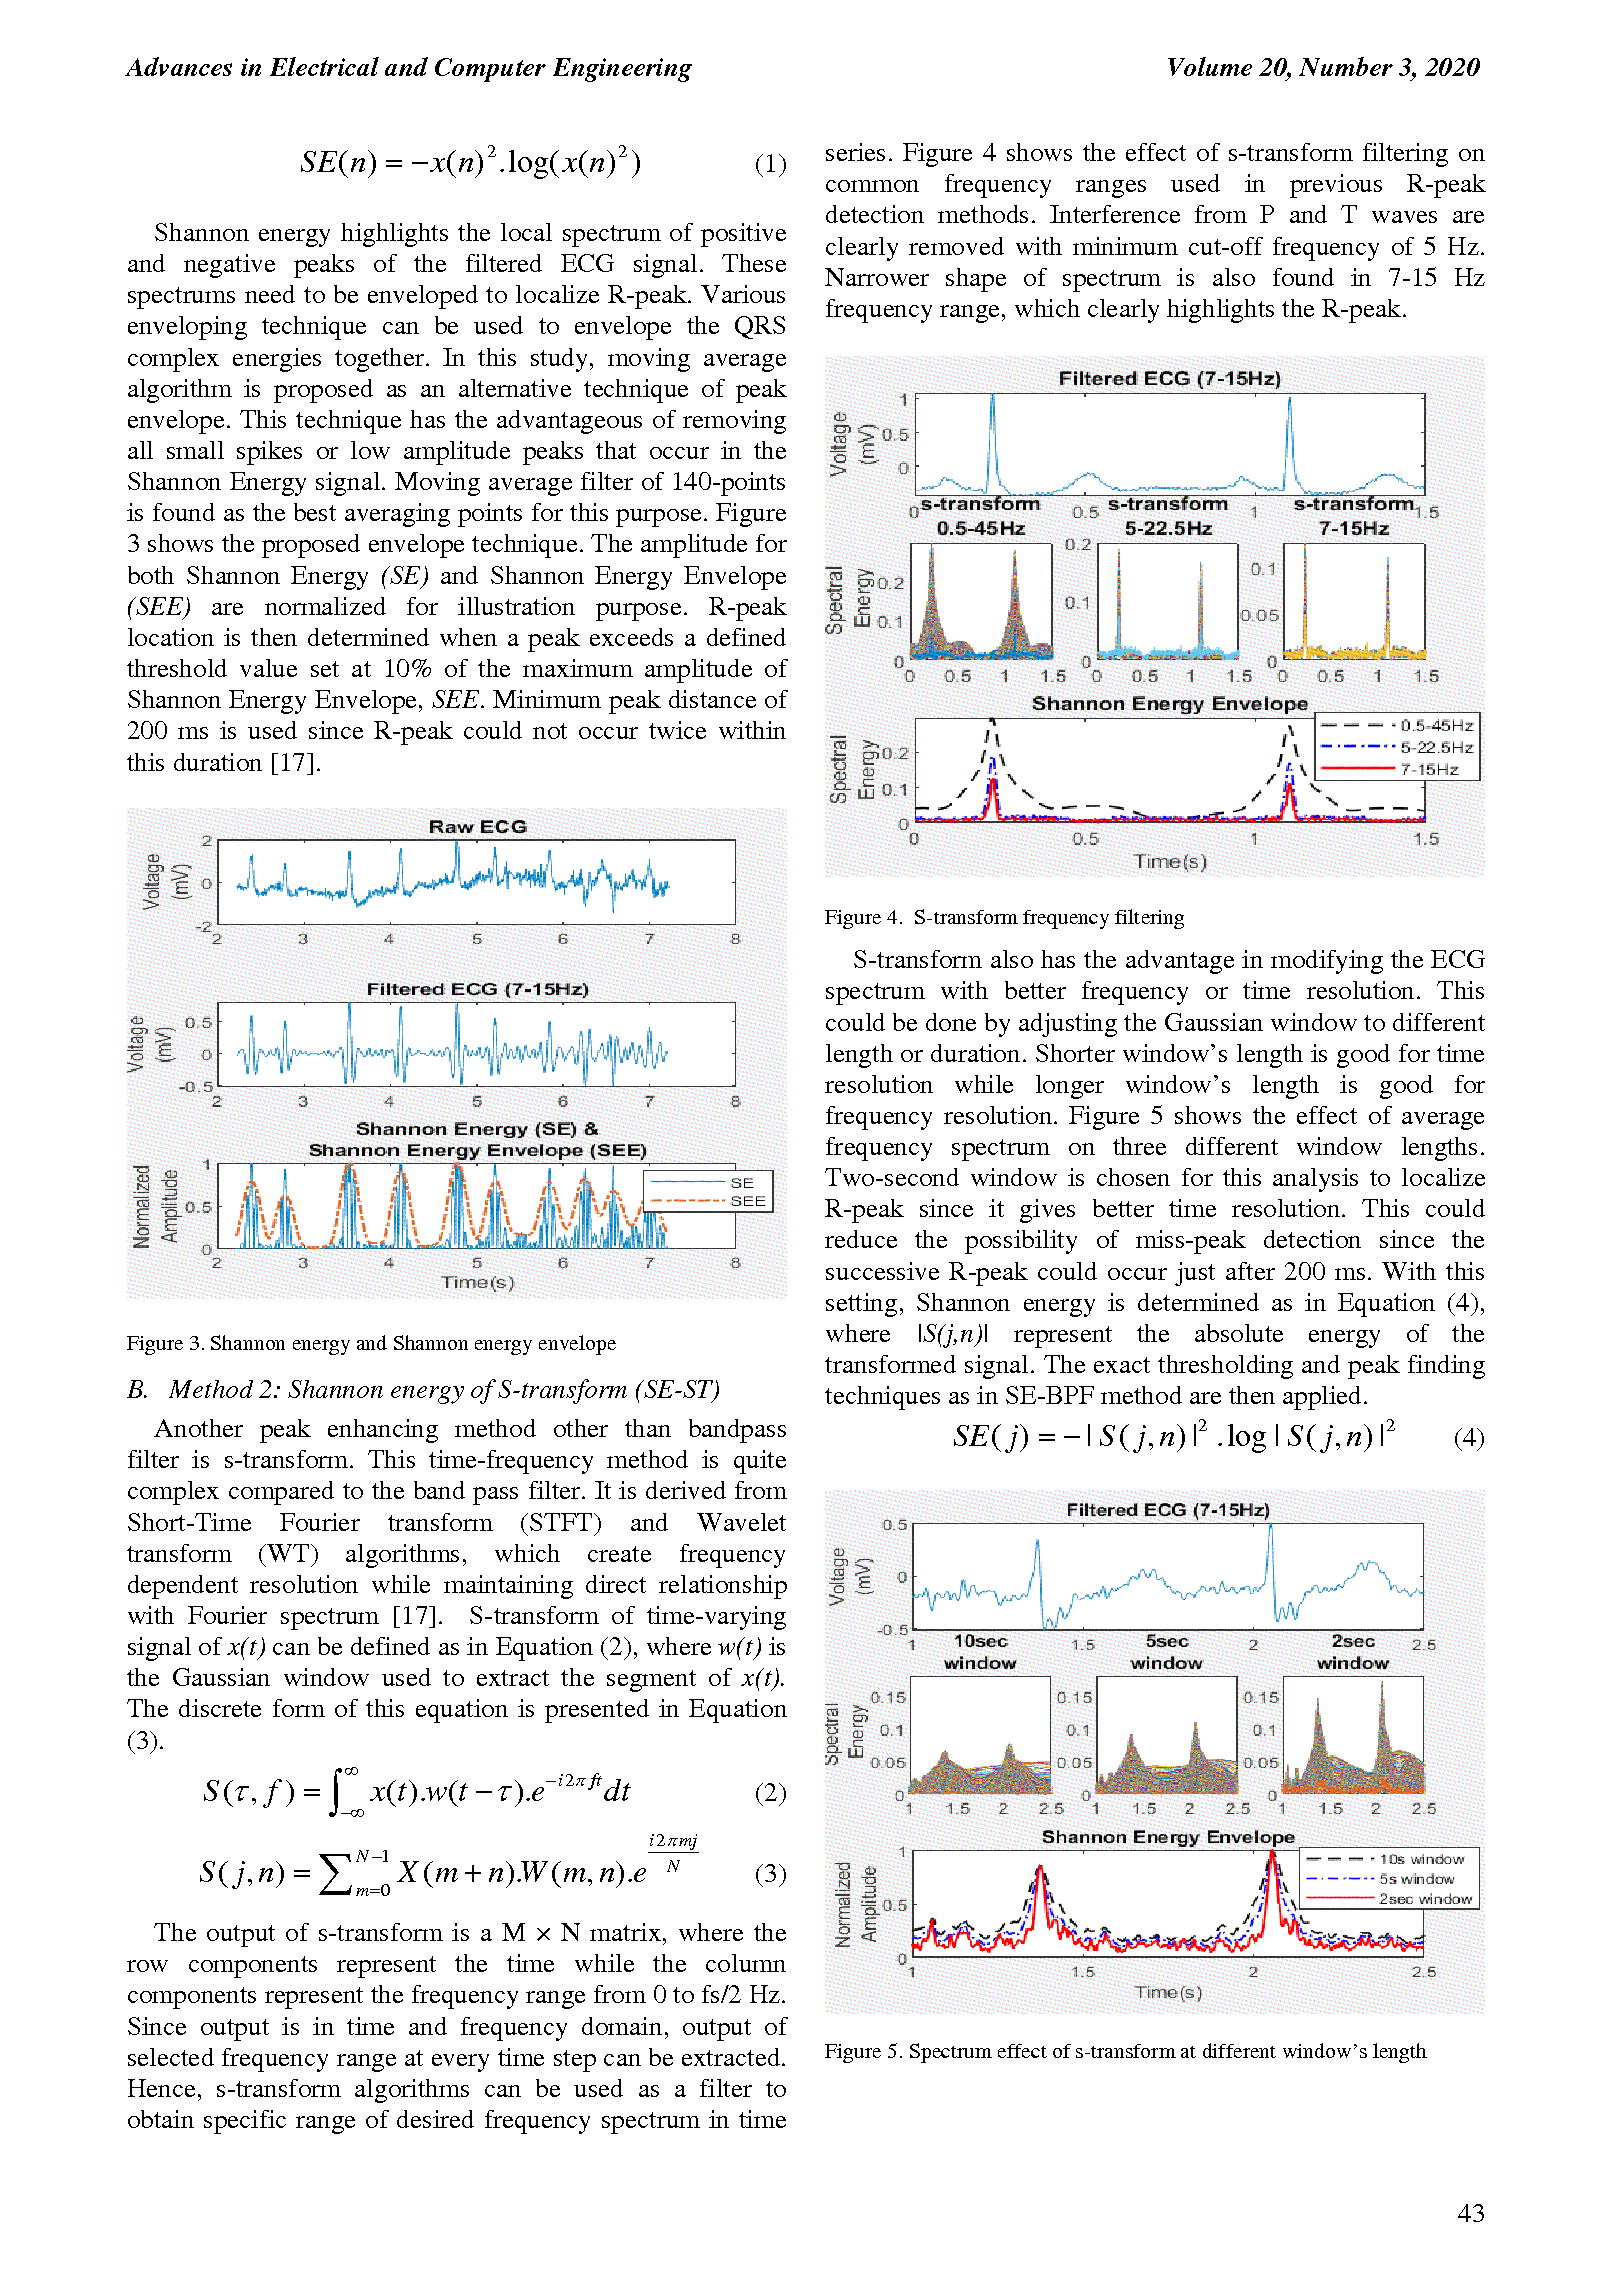 PDF Quickview for paper with DOI:10.4316/AECE.2020.03005